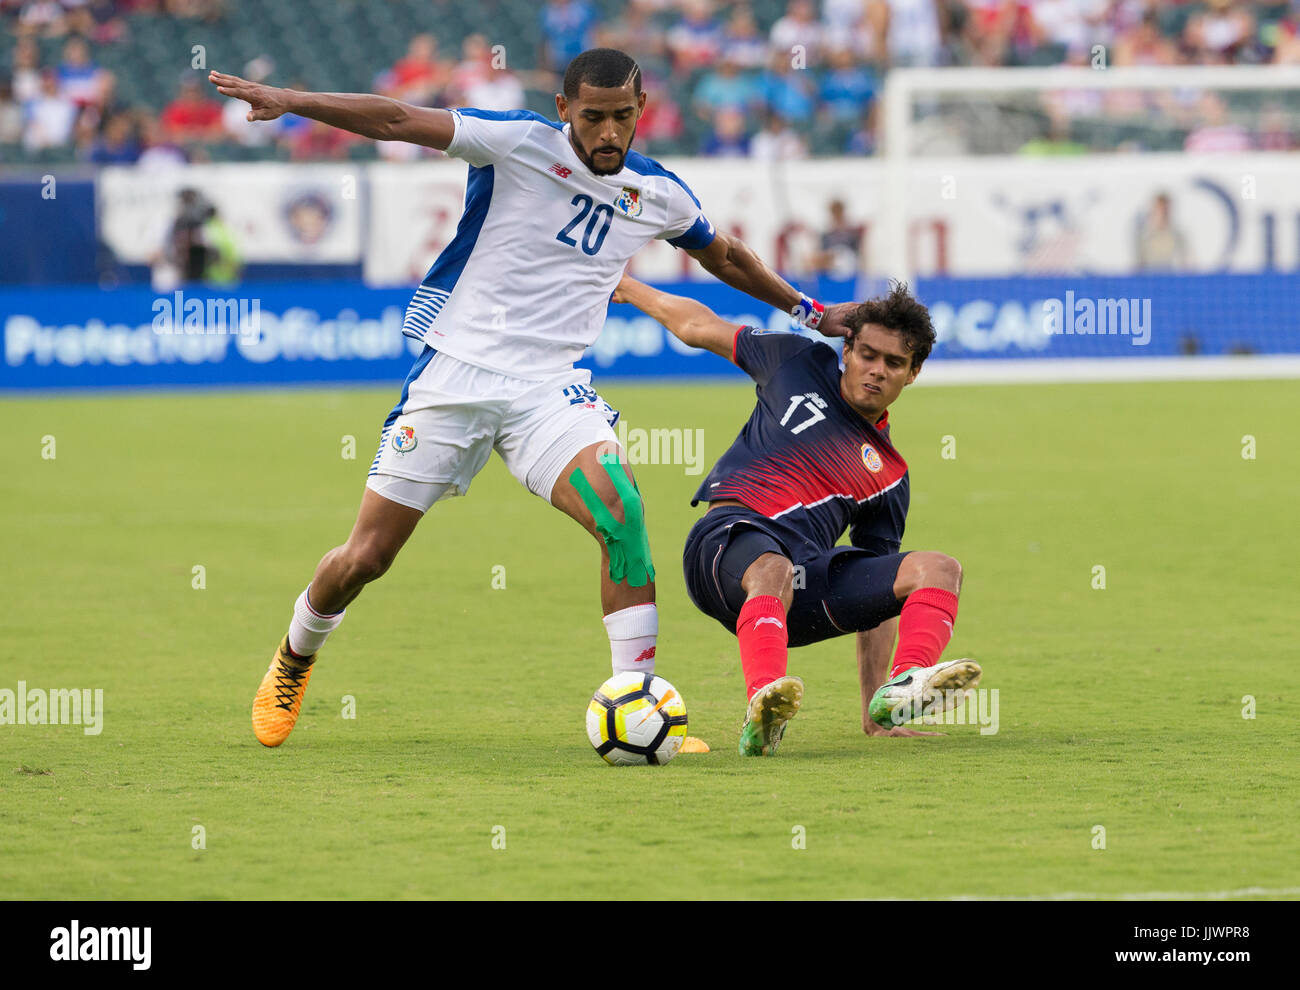 Philadelphia, United States. 19th July, 2017. Yeltsin Tejeda (17) of Costa Rica & Anibal Godoy (20) of Panama fight for ball during 2017 Gold Cup quaterfinal game Costa Rica won 1 - 0 Credit: Lev Radin/Pacific Press/Alamy Live News Stock Photo